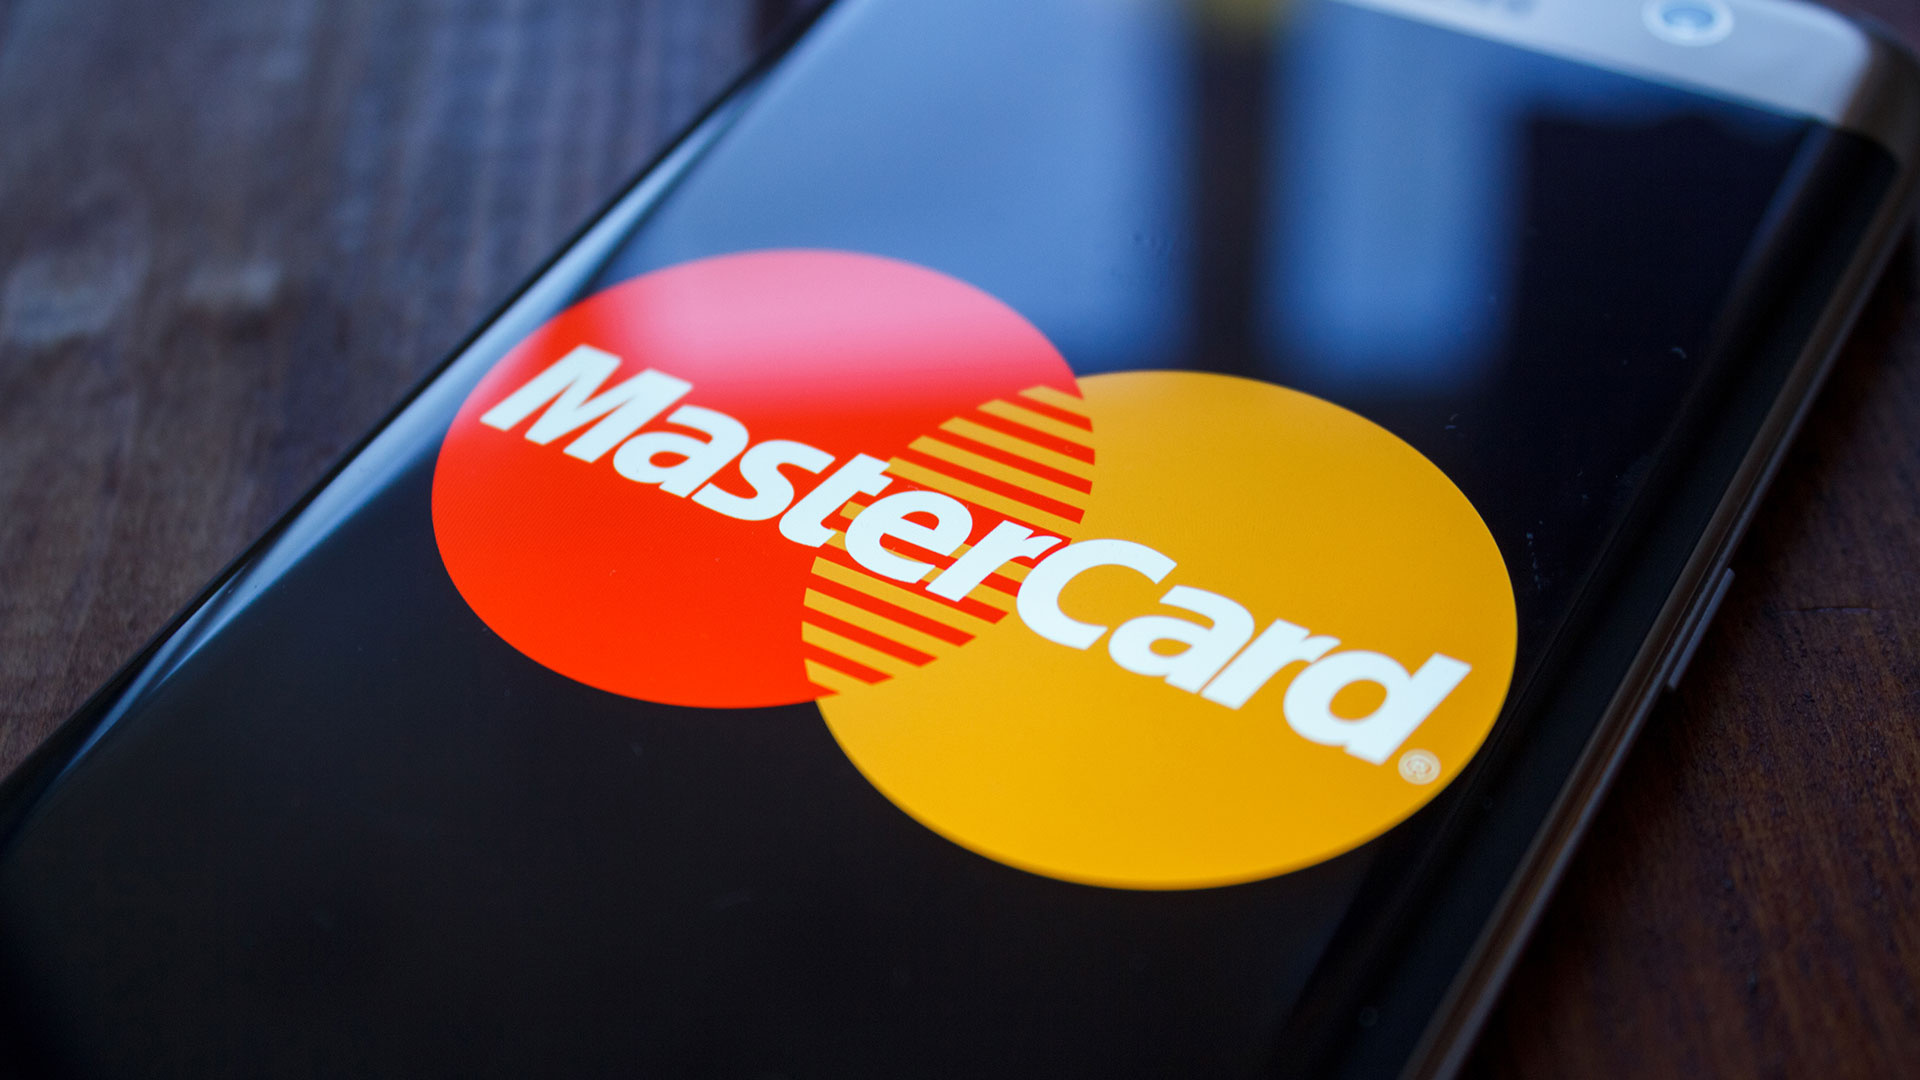 Mastercard: Gadget, Iconic brand mark, Money, Famous banking products. 1920x1080 Full HD Background.